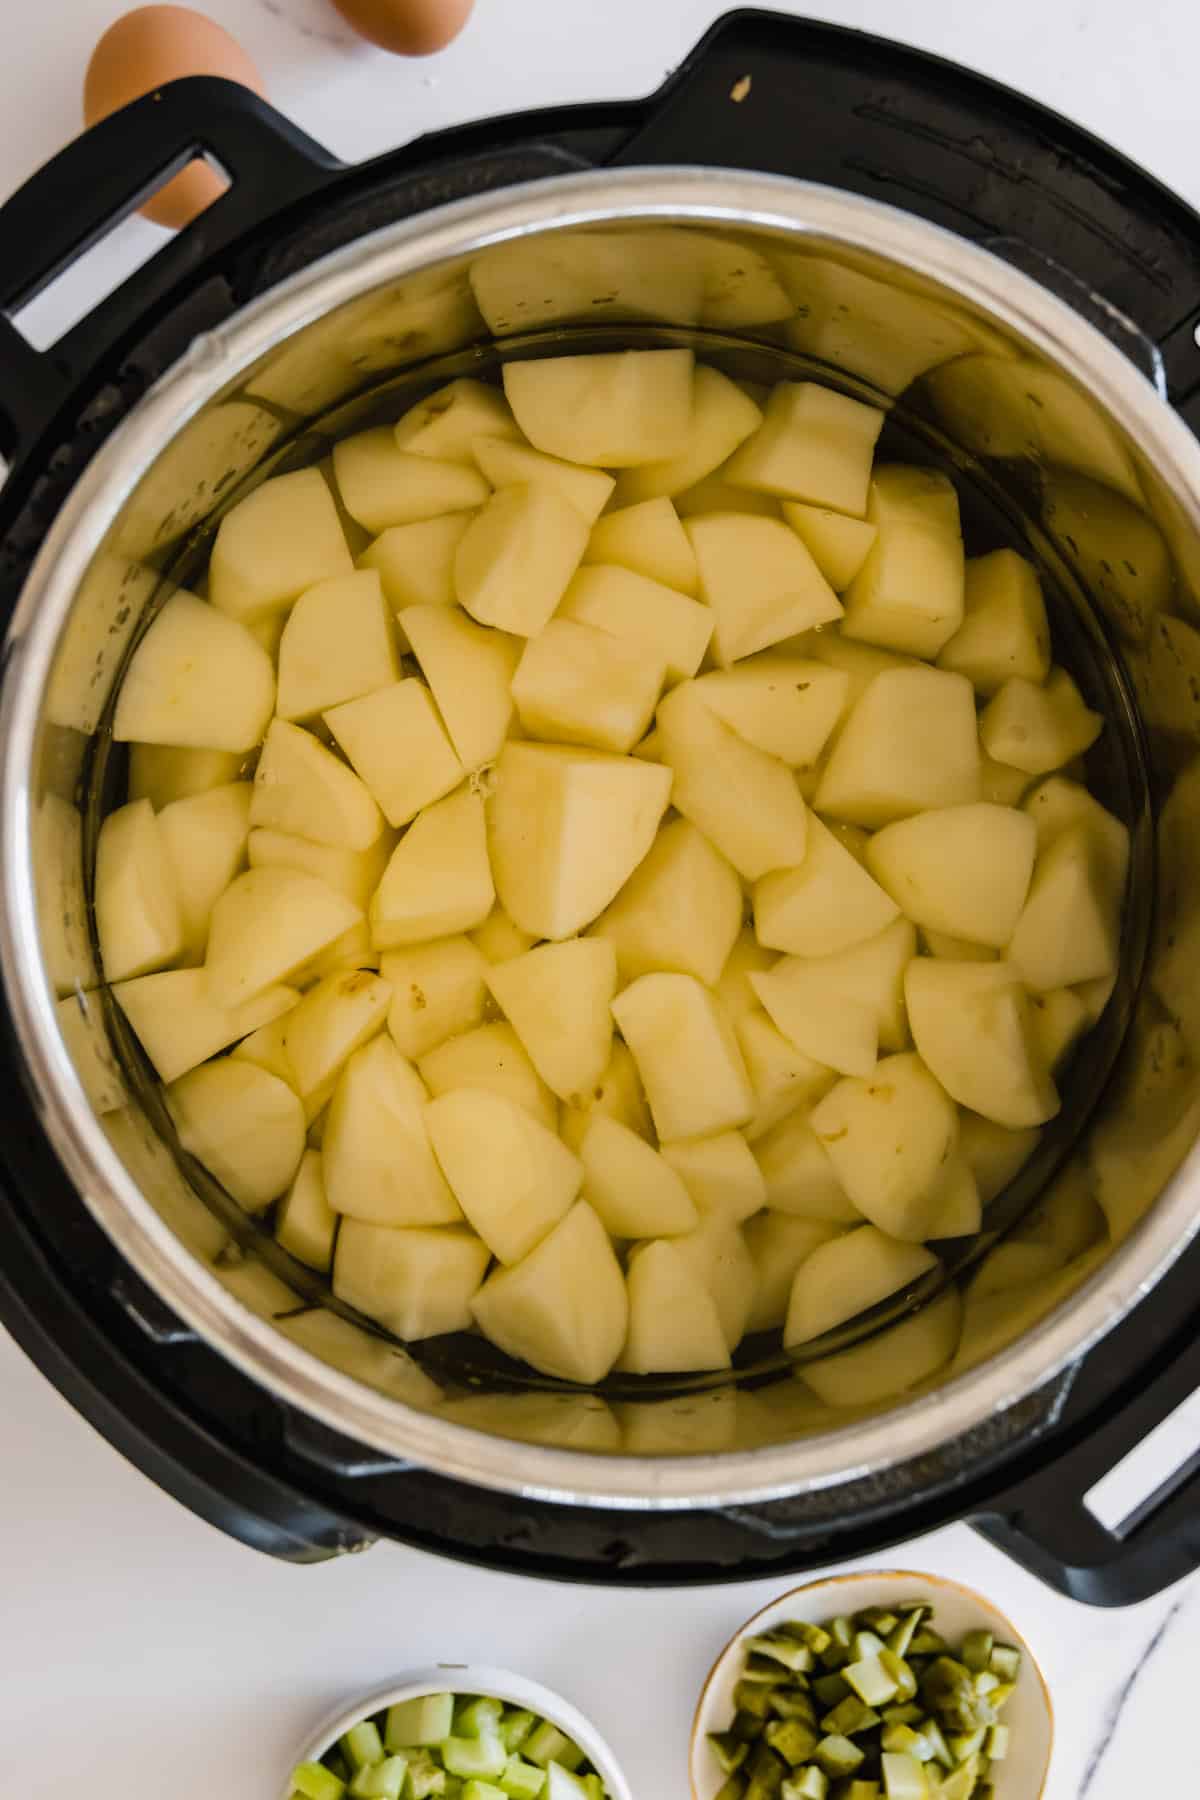 Chopped, Peeled Potatoes Inside of an Instant Pot on a Countertop